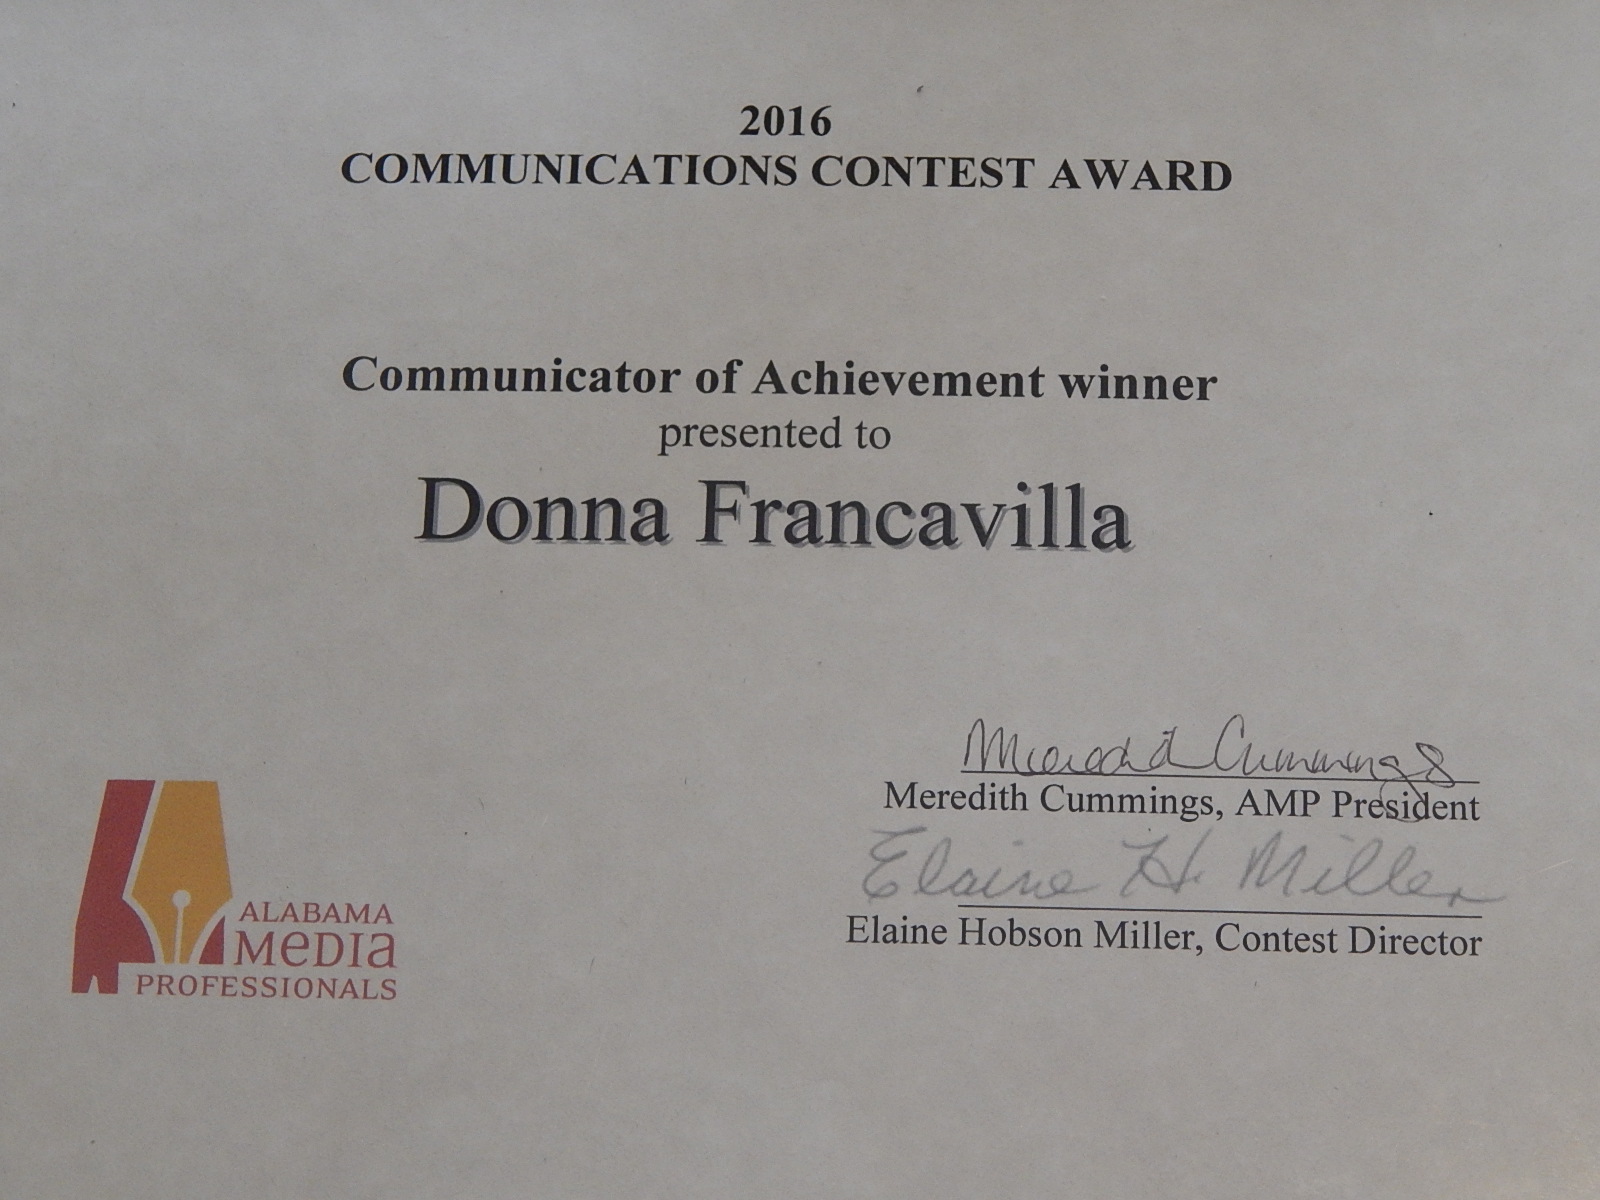 2016 Communicator of Achievement, Awarded by Alabama Media Professionals presented to Donna Francavilla May, 2016